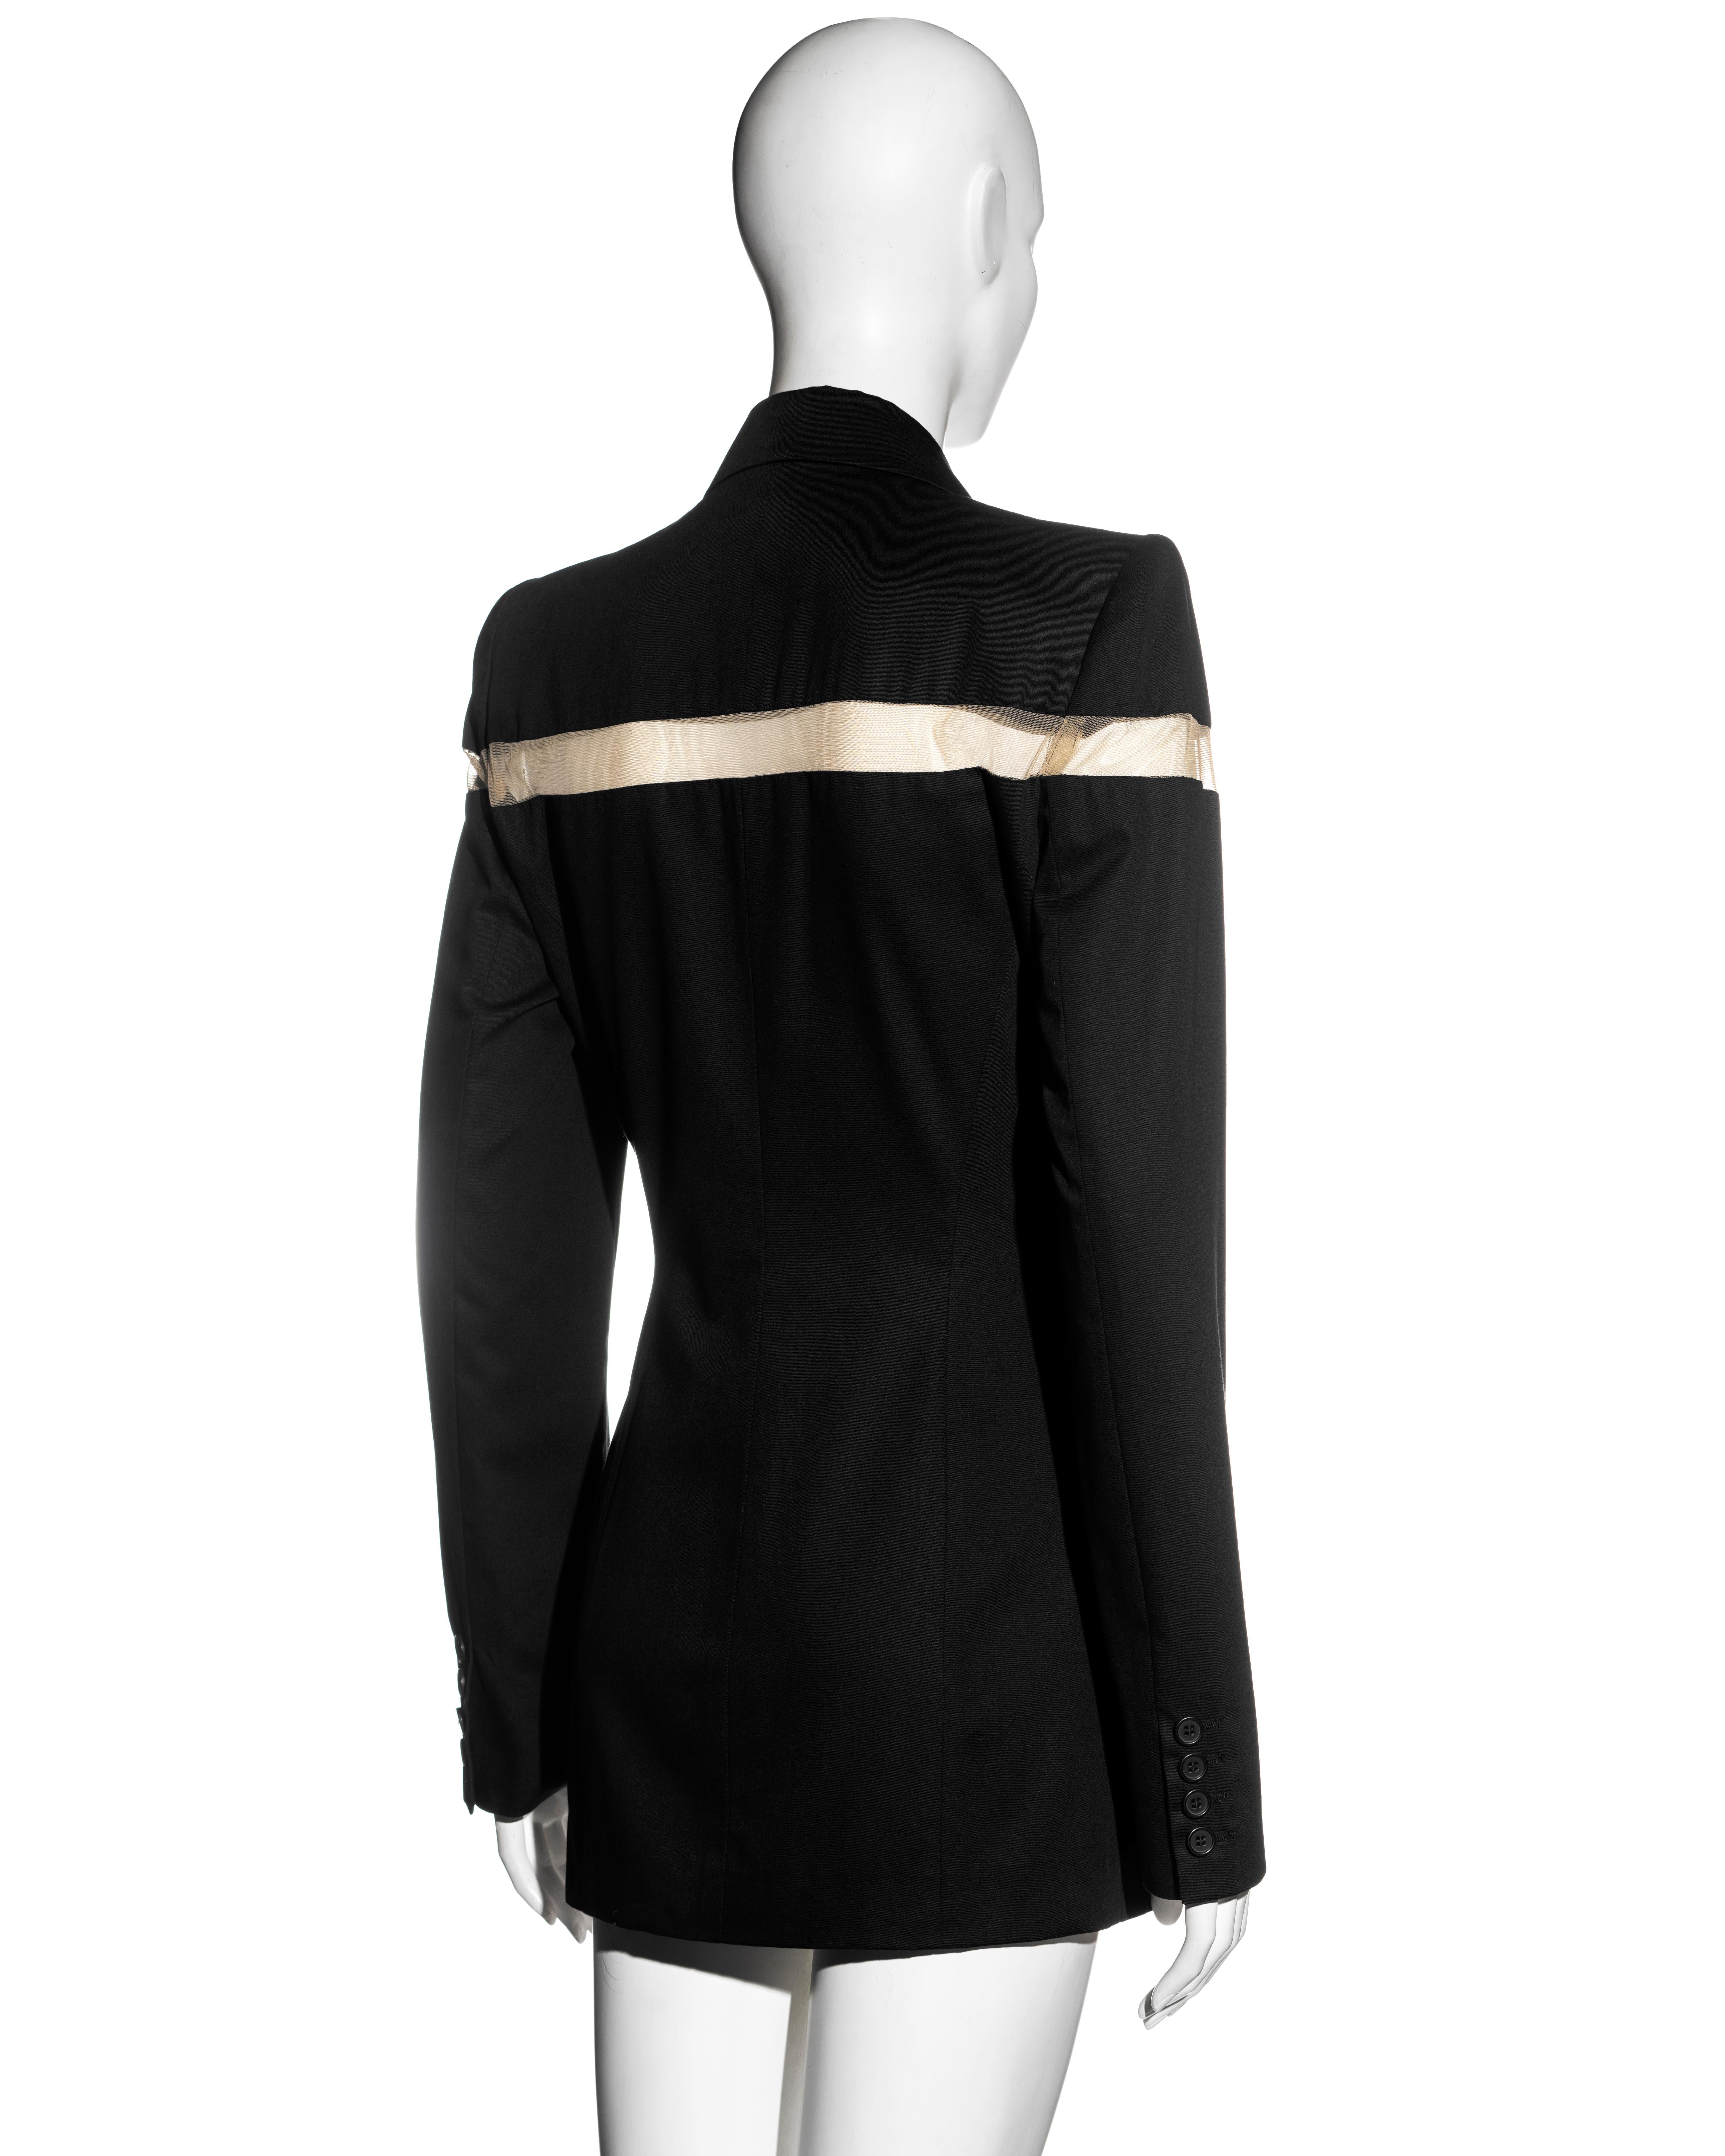 Alexander McQueen black double-breasted blazer mini dress with cut-out, ss 1998 For Sale 3